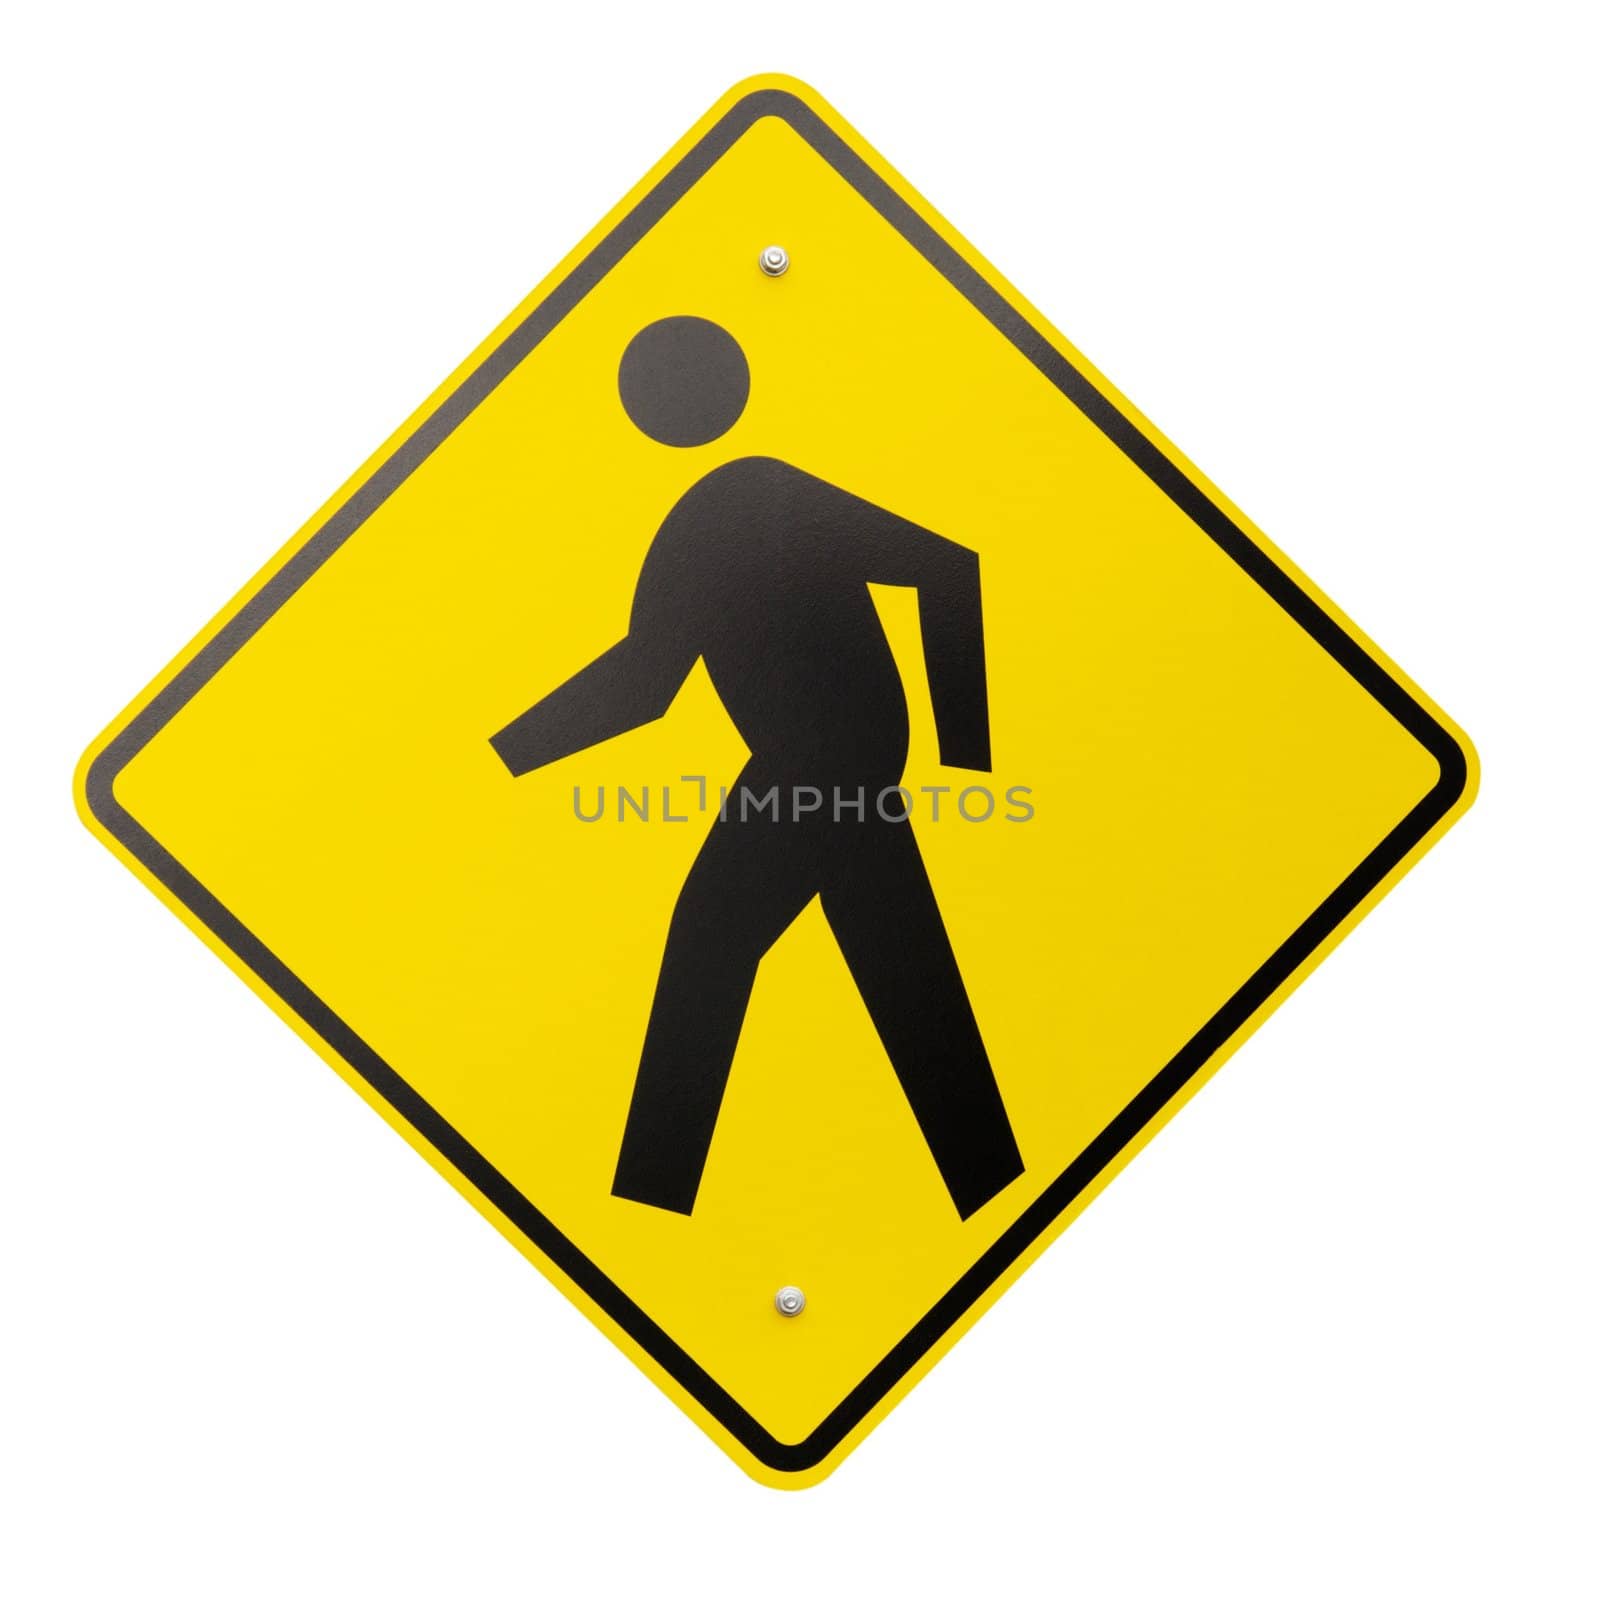 Isolated Yellow Pedestrian Warning or Safety Sign by pixelsnap